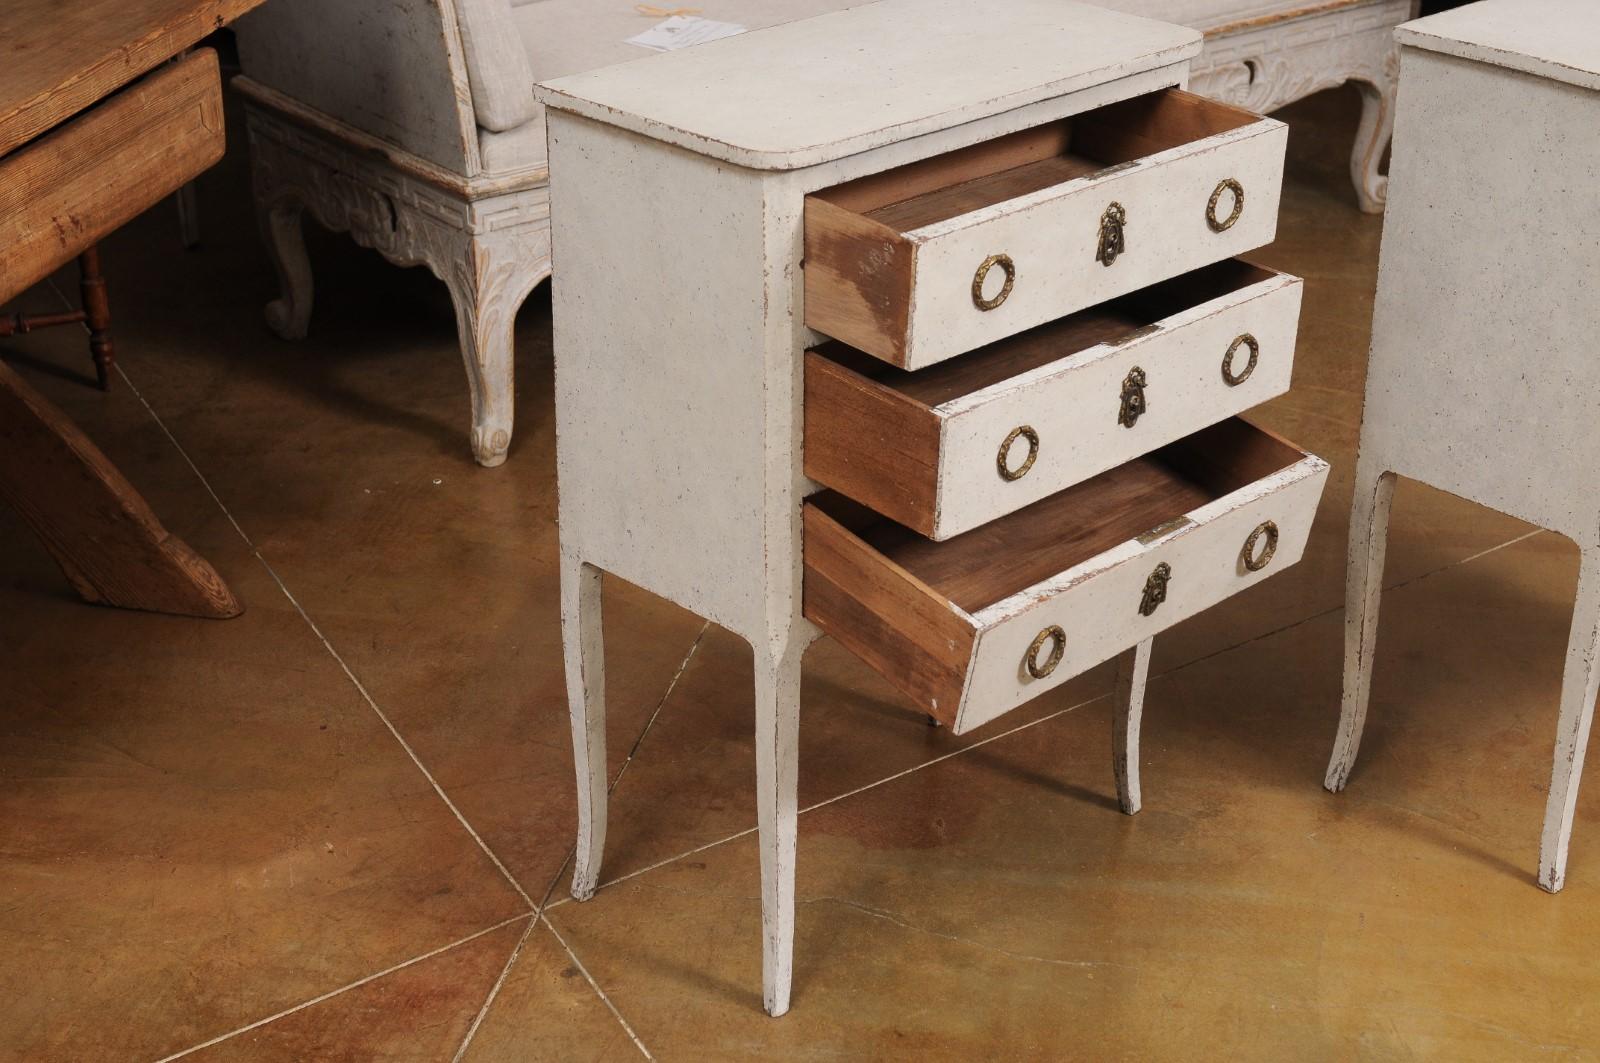 20th Century Swedish Gray Painted Bedside Tables with Three Drawers and Cabriole Legs, a Pair